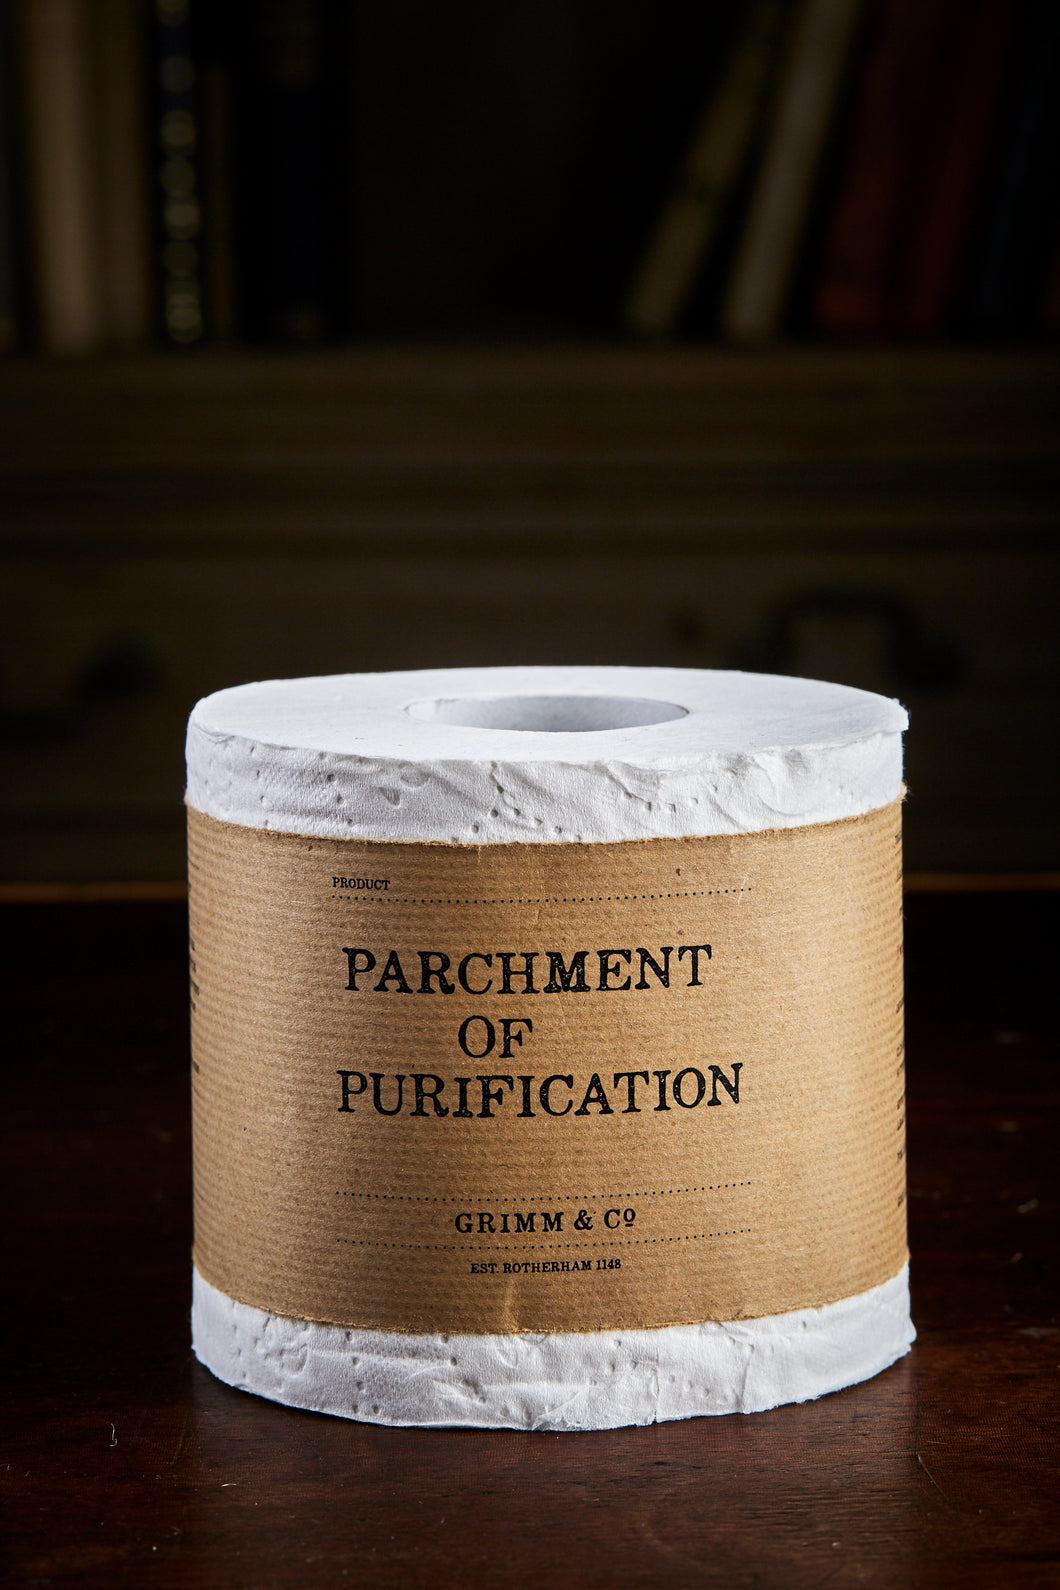 Image shows a toilet roll with a brown kraft label wrapped around the middle that reads 'Parchment of Purification'.